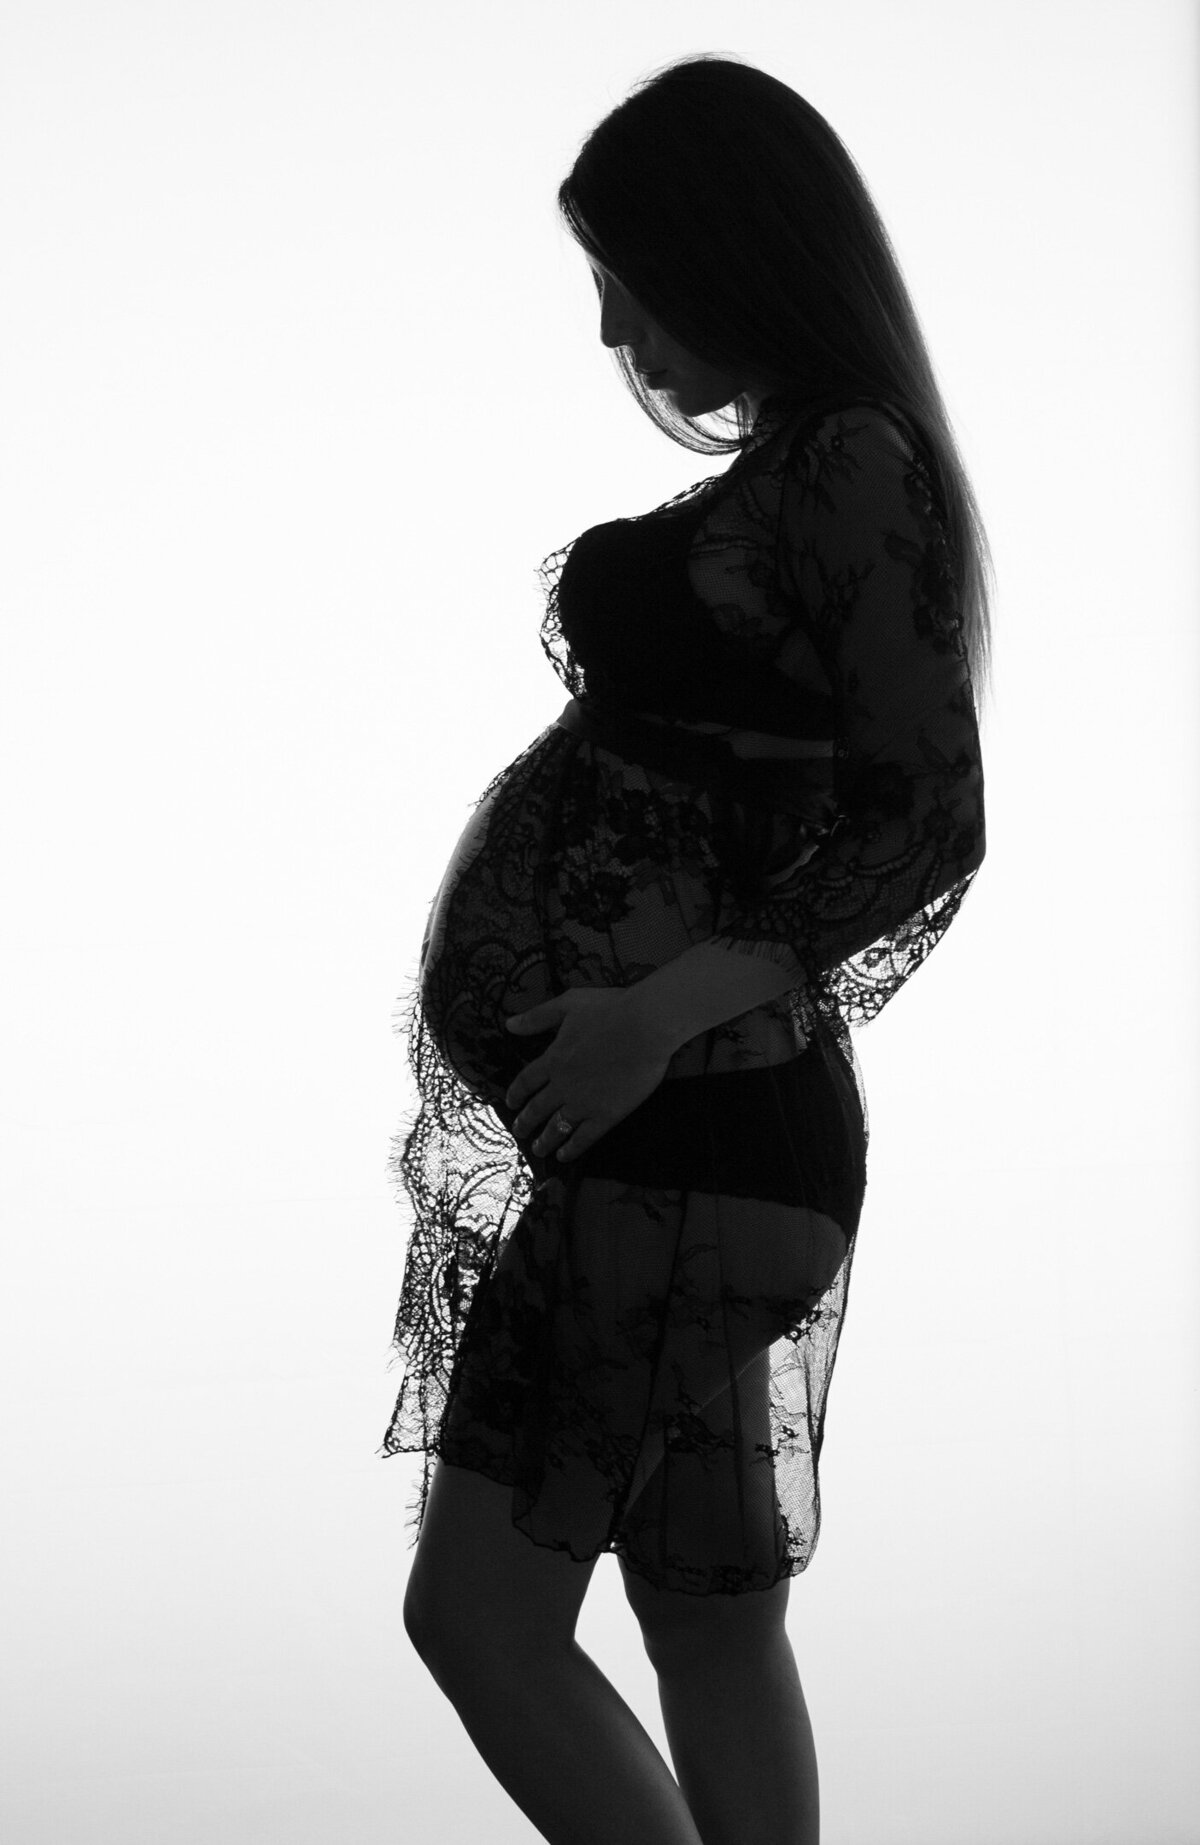 Tally Safdie photography maternity pregnancy photo black and white lace